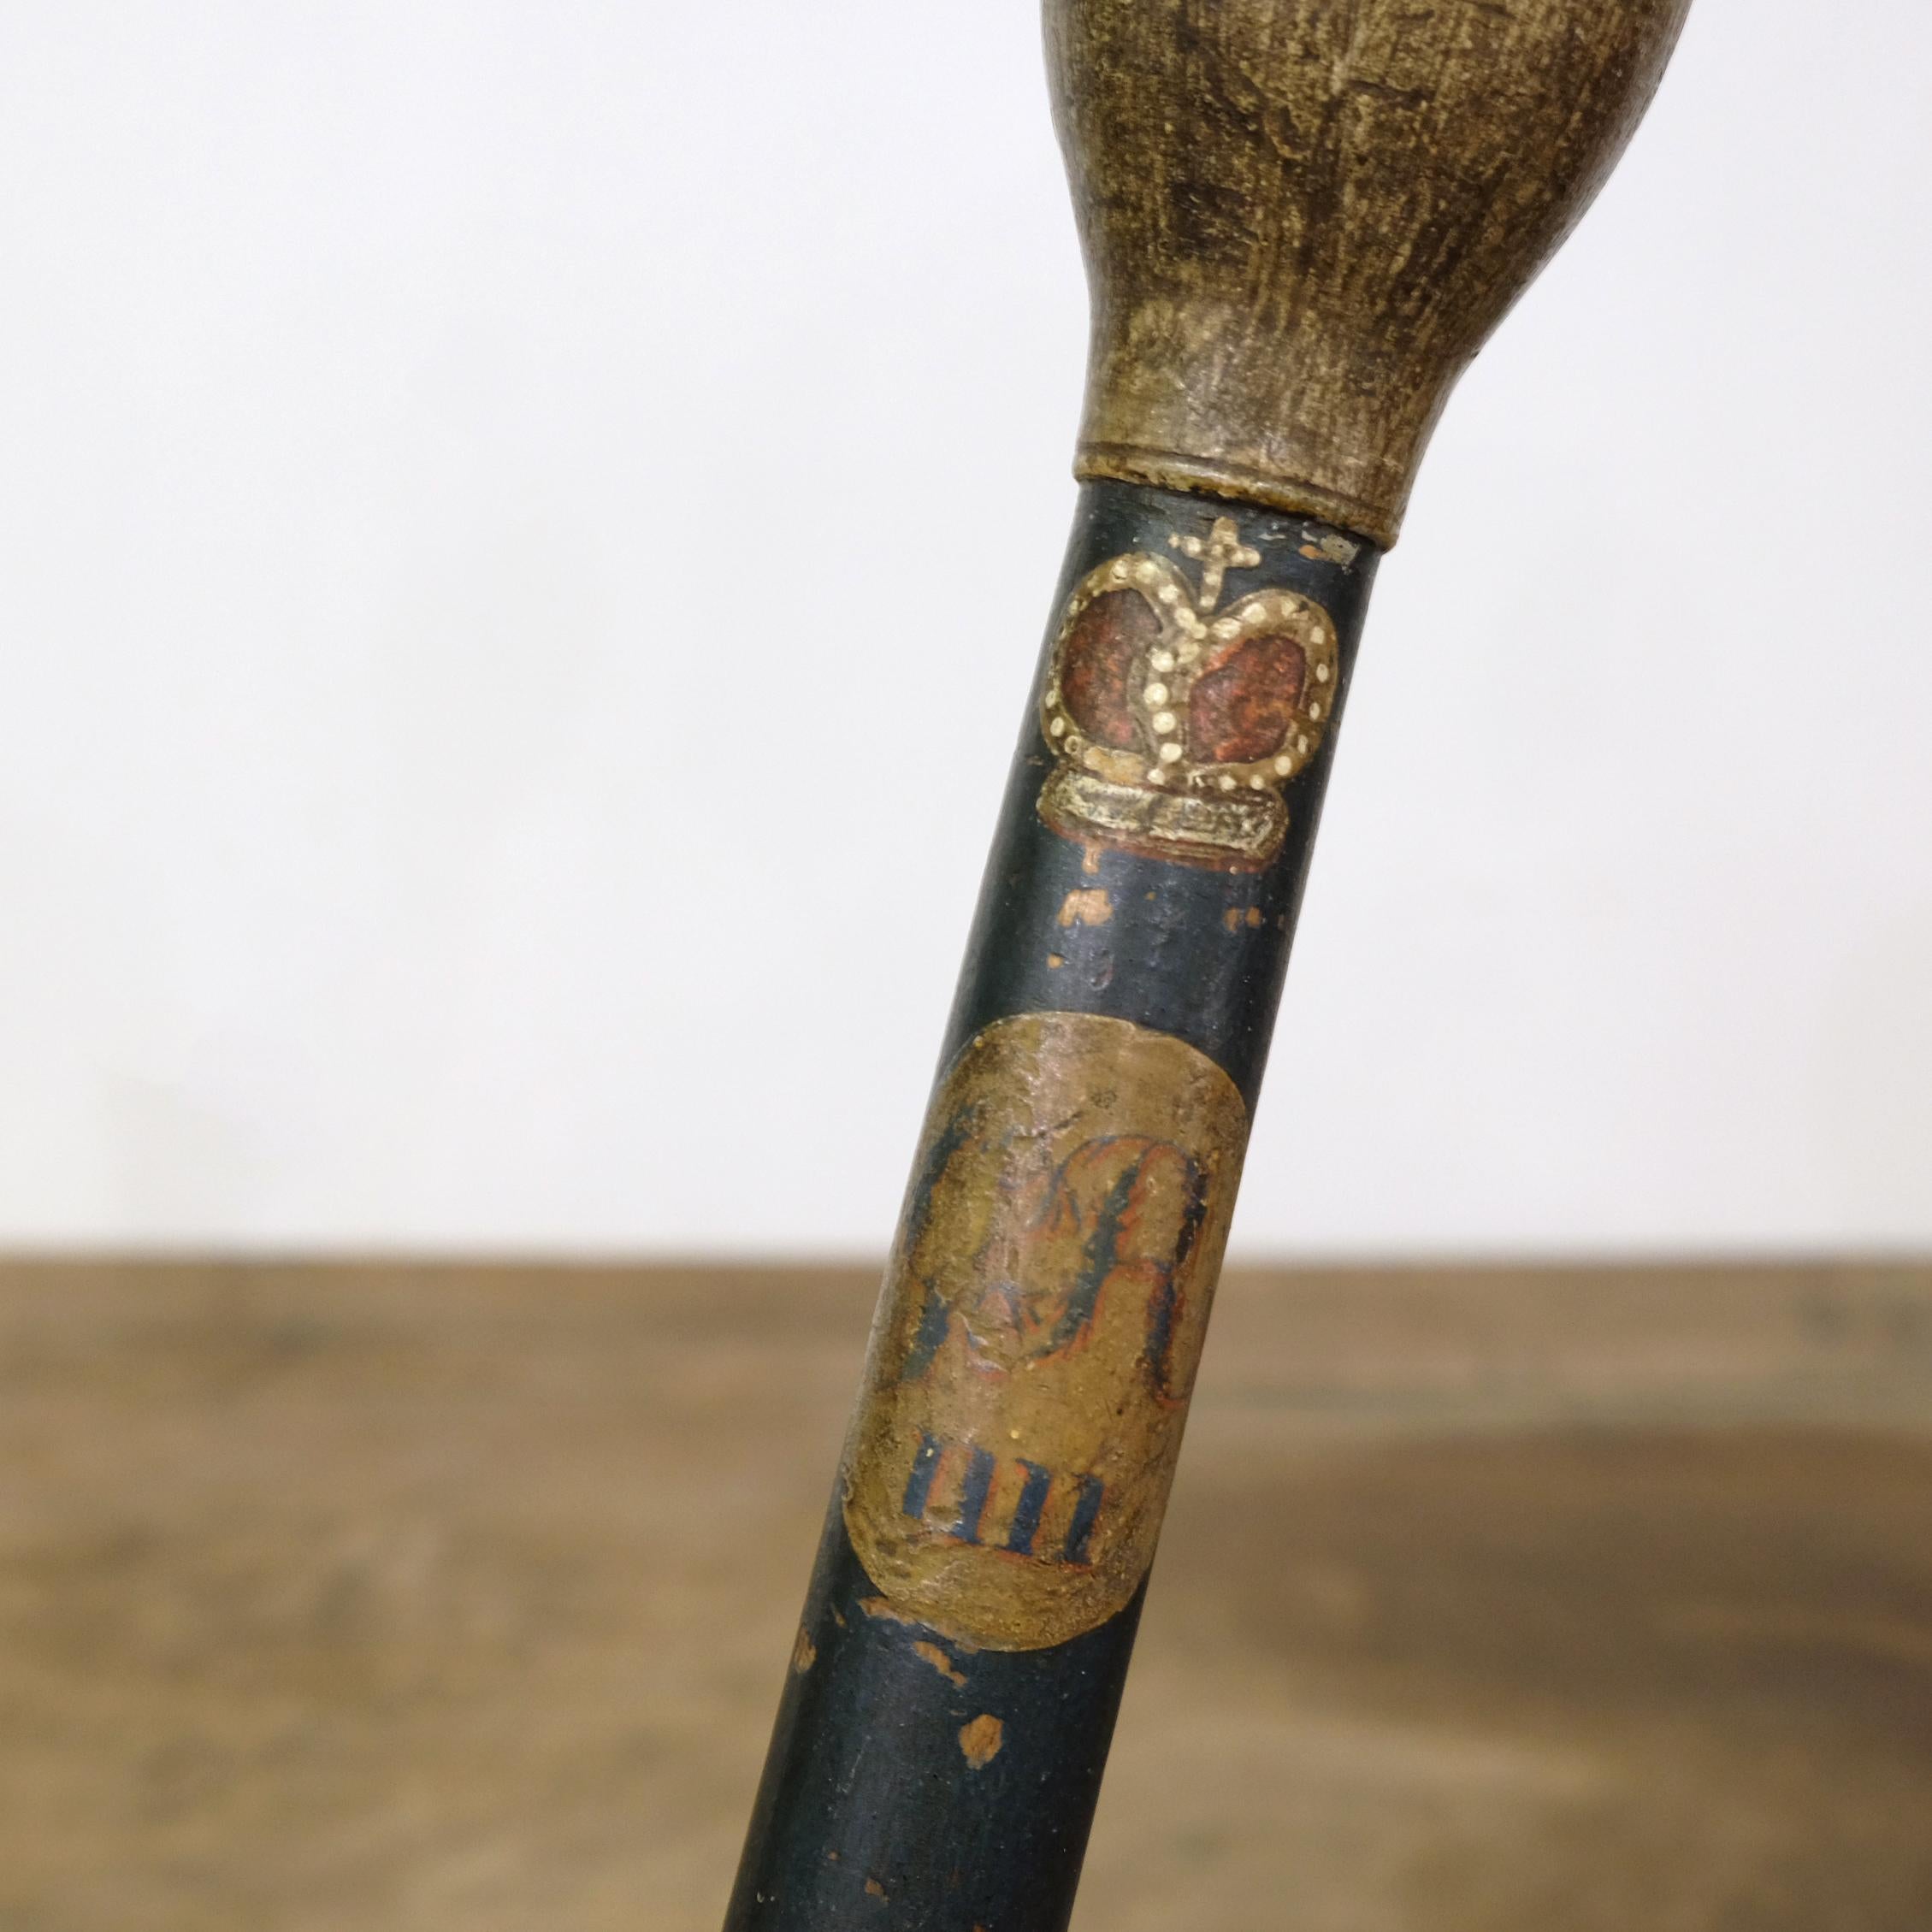 A George IV painted police cosh or truncheon in very good order with only very minor paint loss. Well preserved hand-painted royal cipher with detailed crown above. On bespoke made ebonised oak stand. George IV’s reign lasted only ten years from